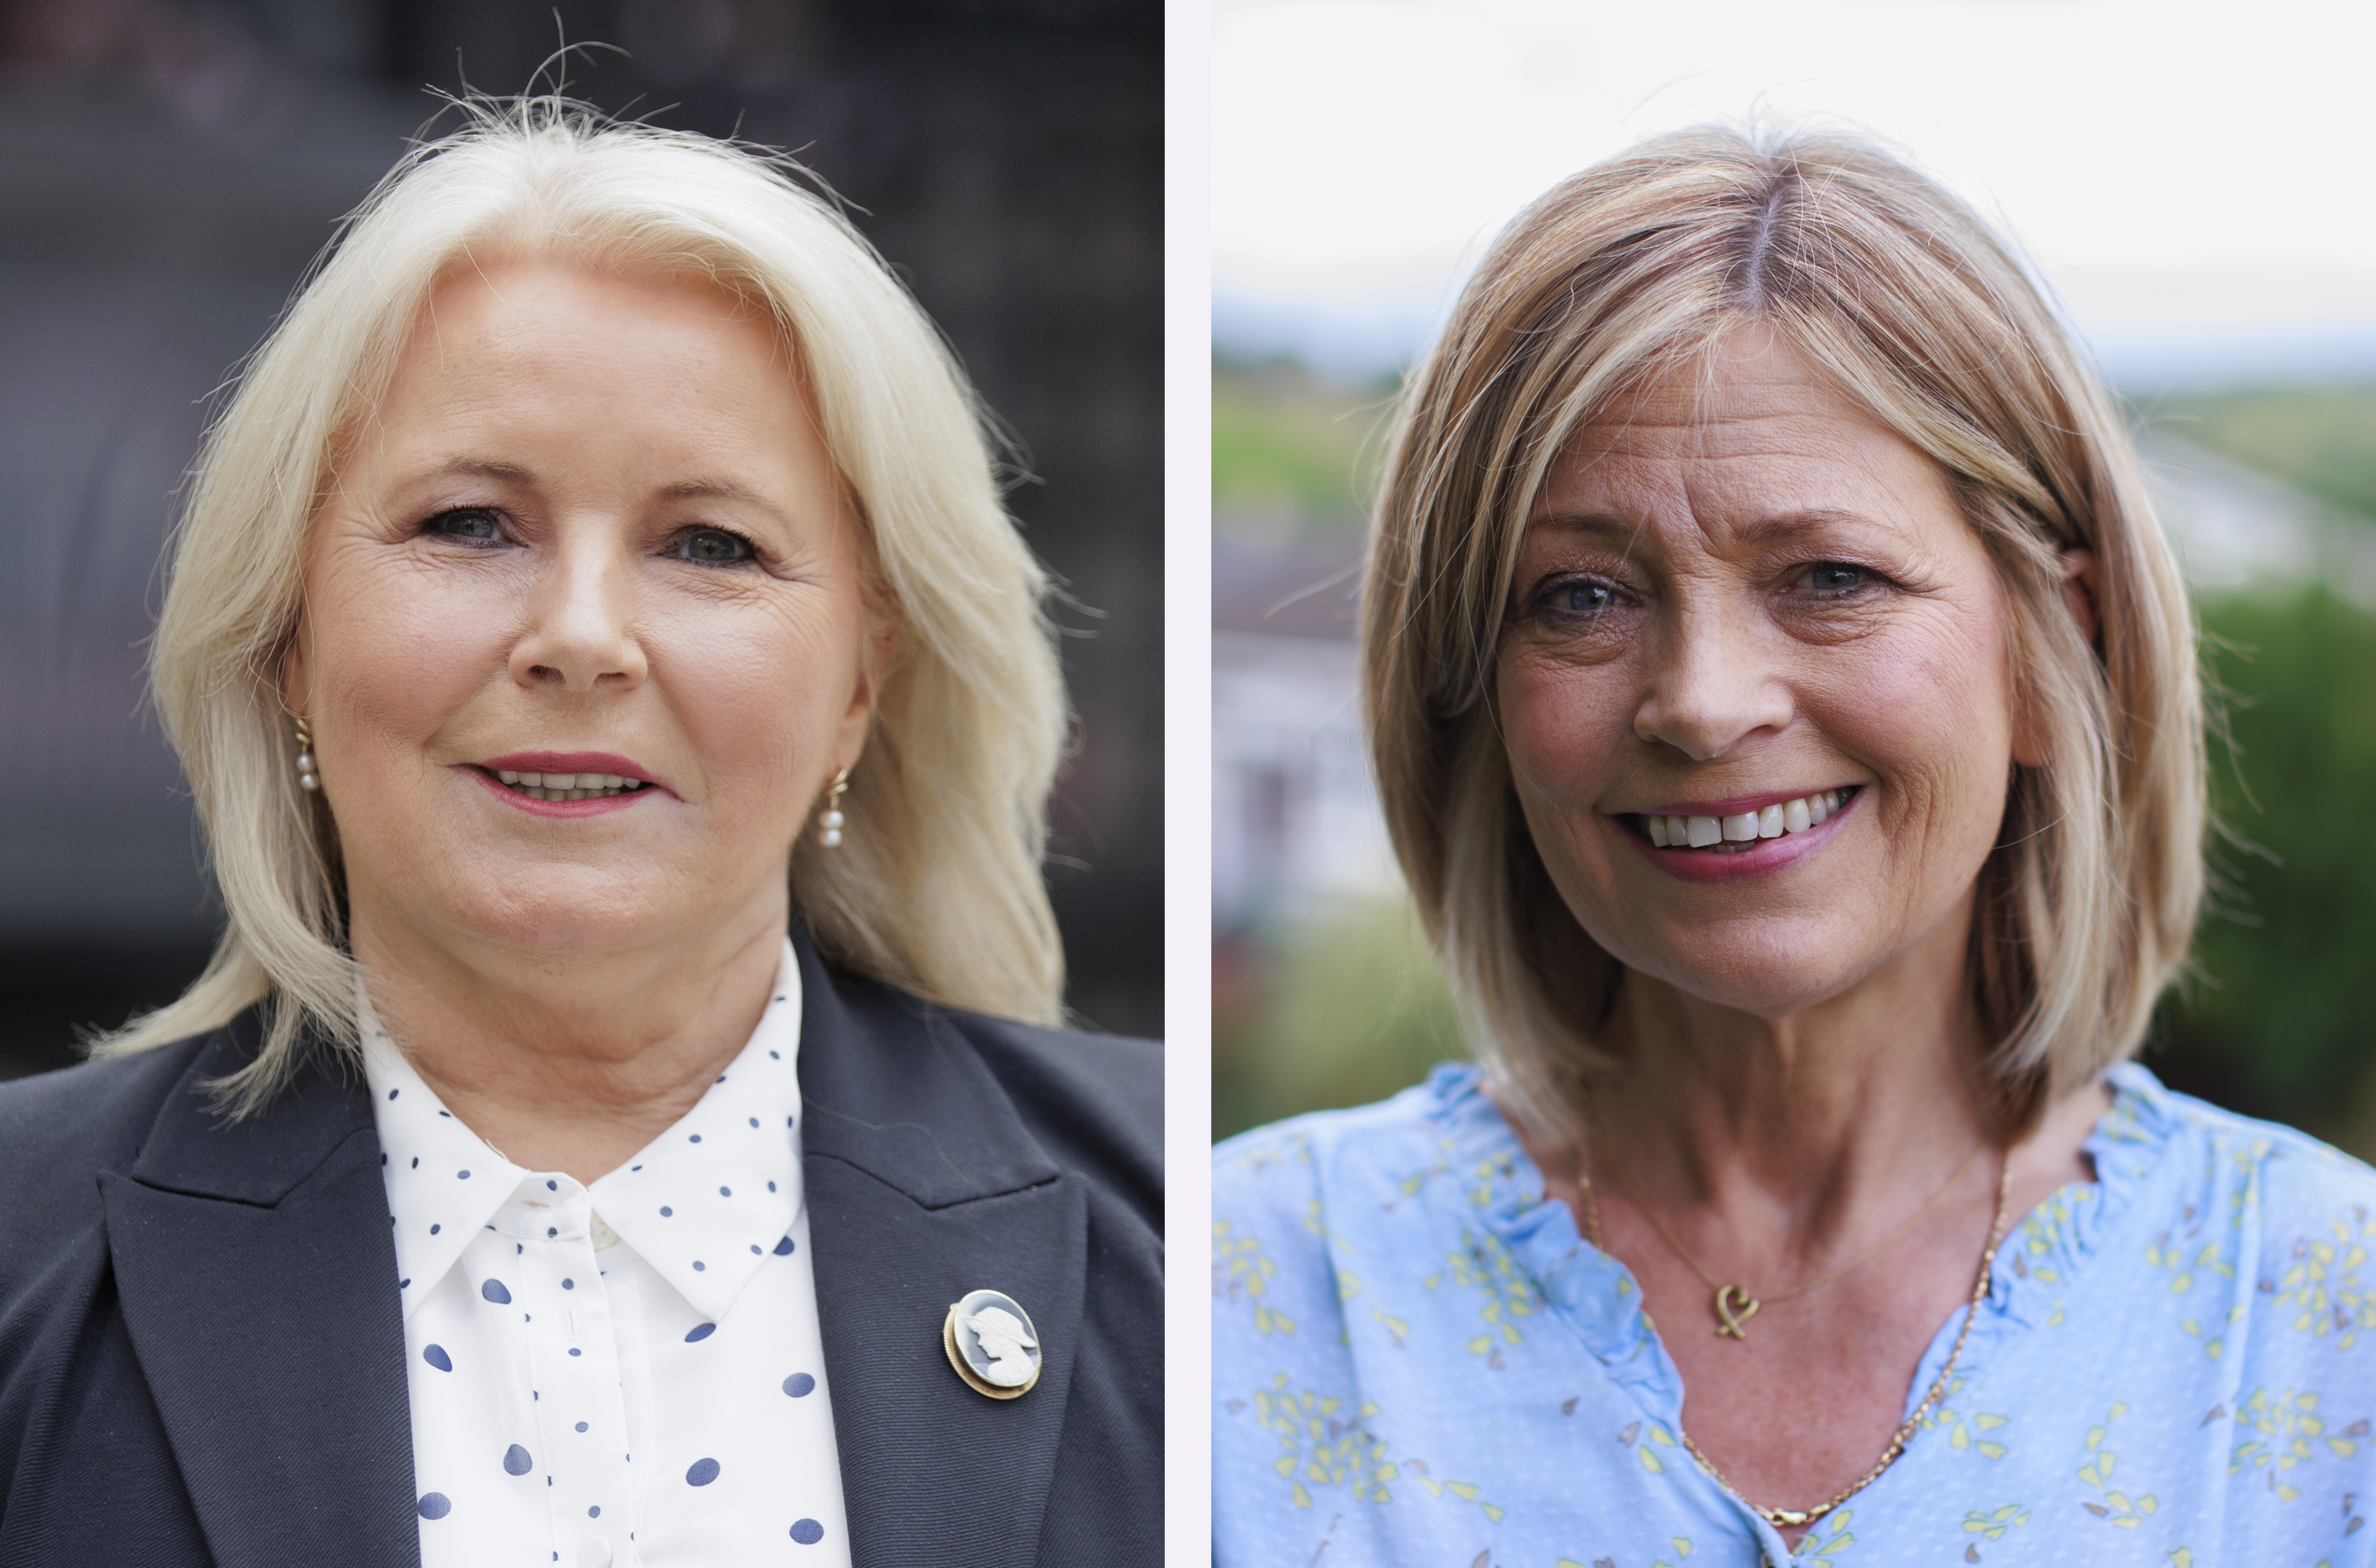 Composite photo of Sinn Fein's candidate for Fermanagh and South Tyrone Pat Cullen (left) and Diana Armstrong, UUP parliamentary candidate for Fermanagh and South Tyrone